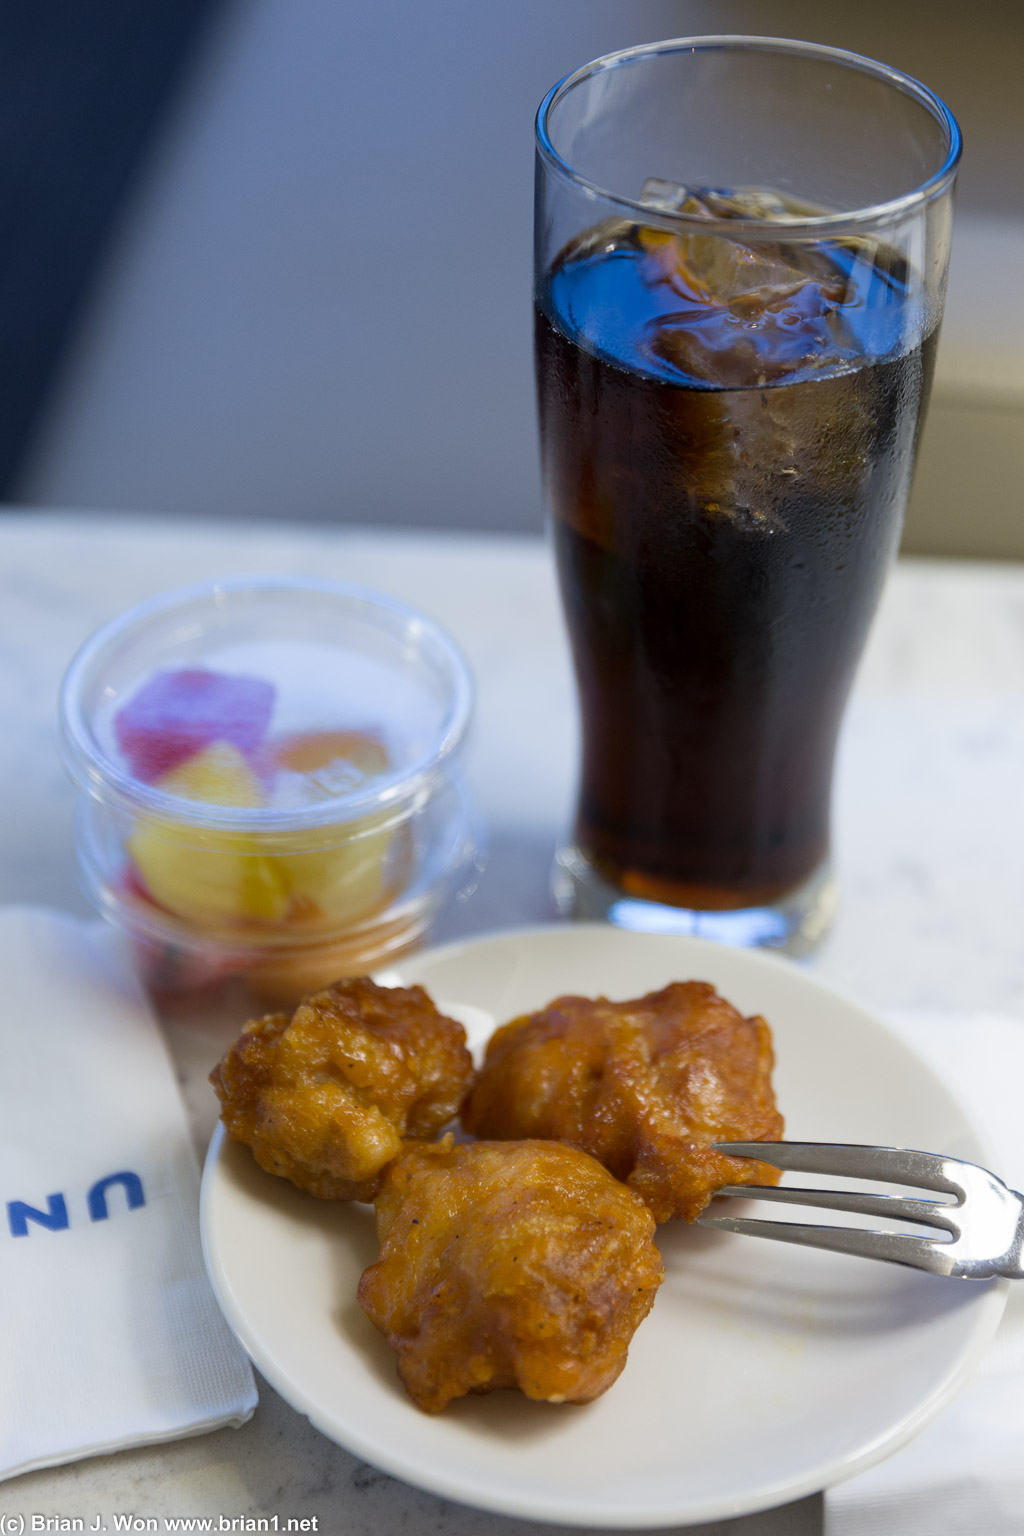 United Club switched to fried chicken balls. Actually pretty good.